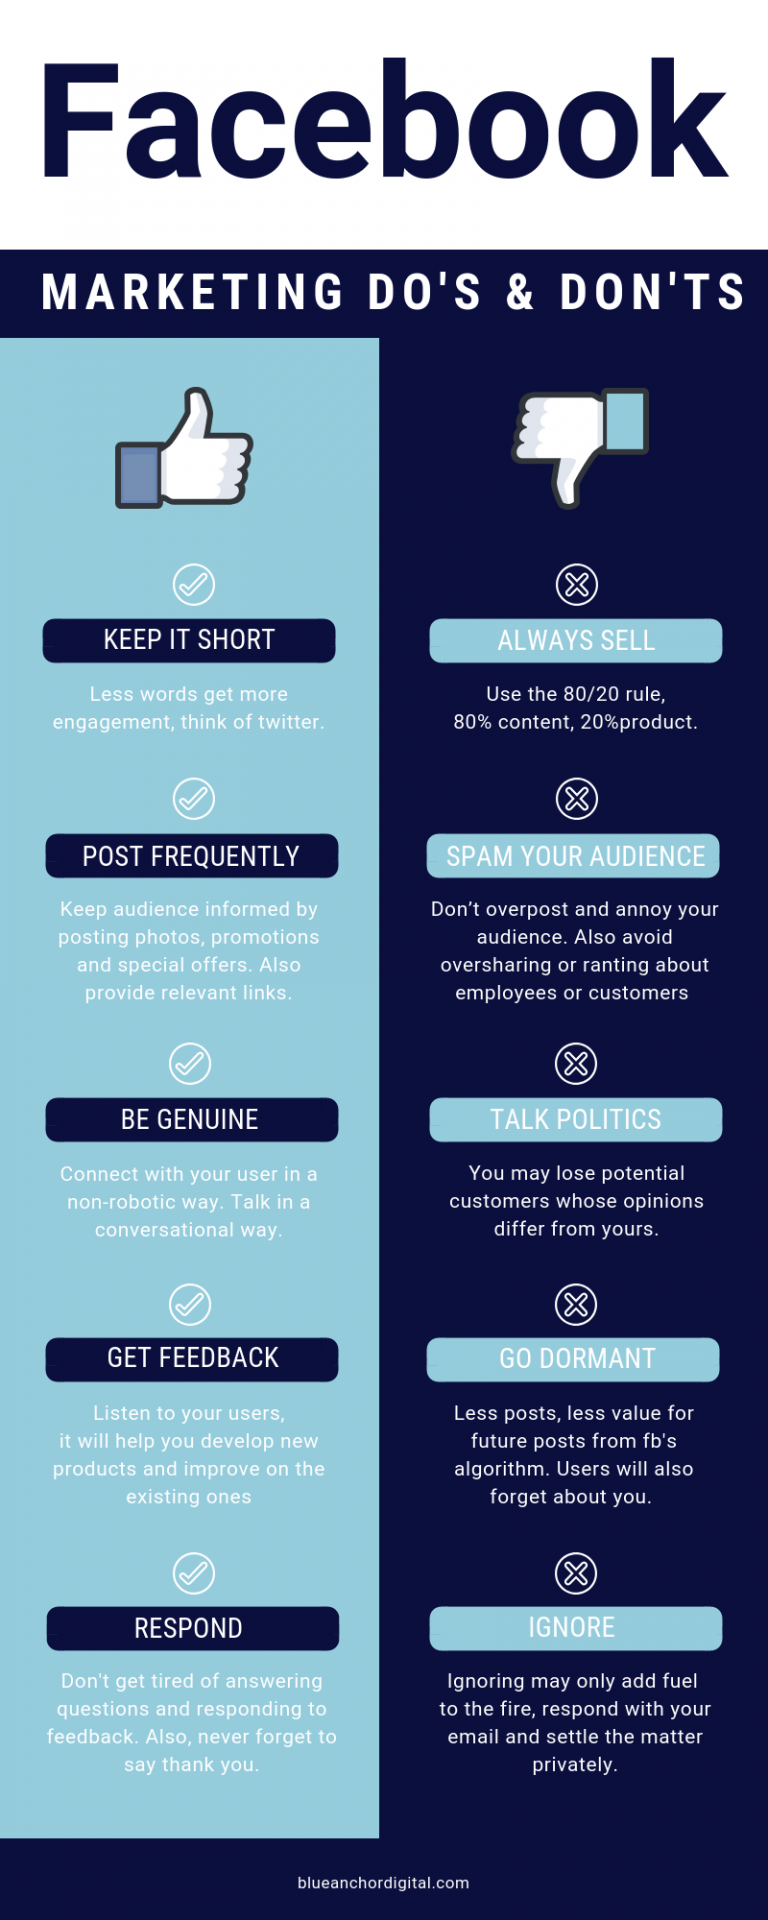 Facebook Reactions and Their Pros and Cons #infographic - Visualistan